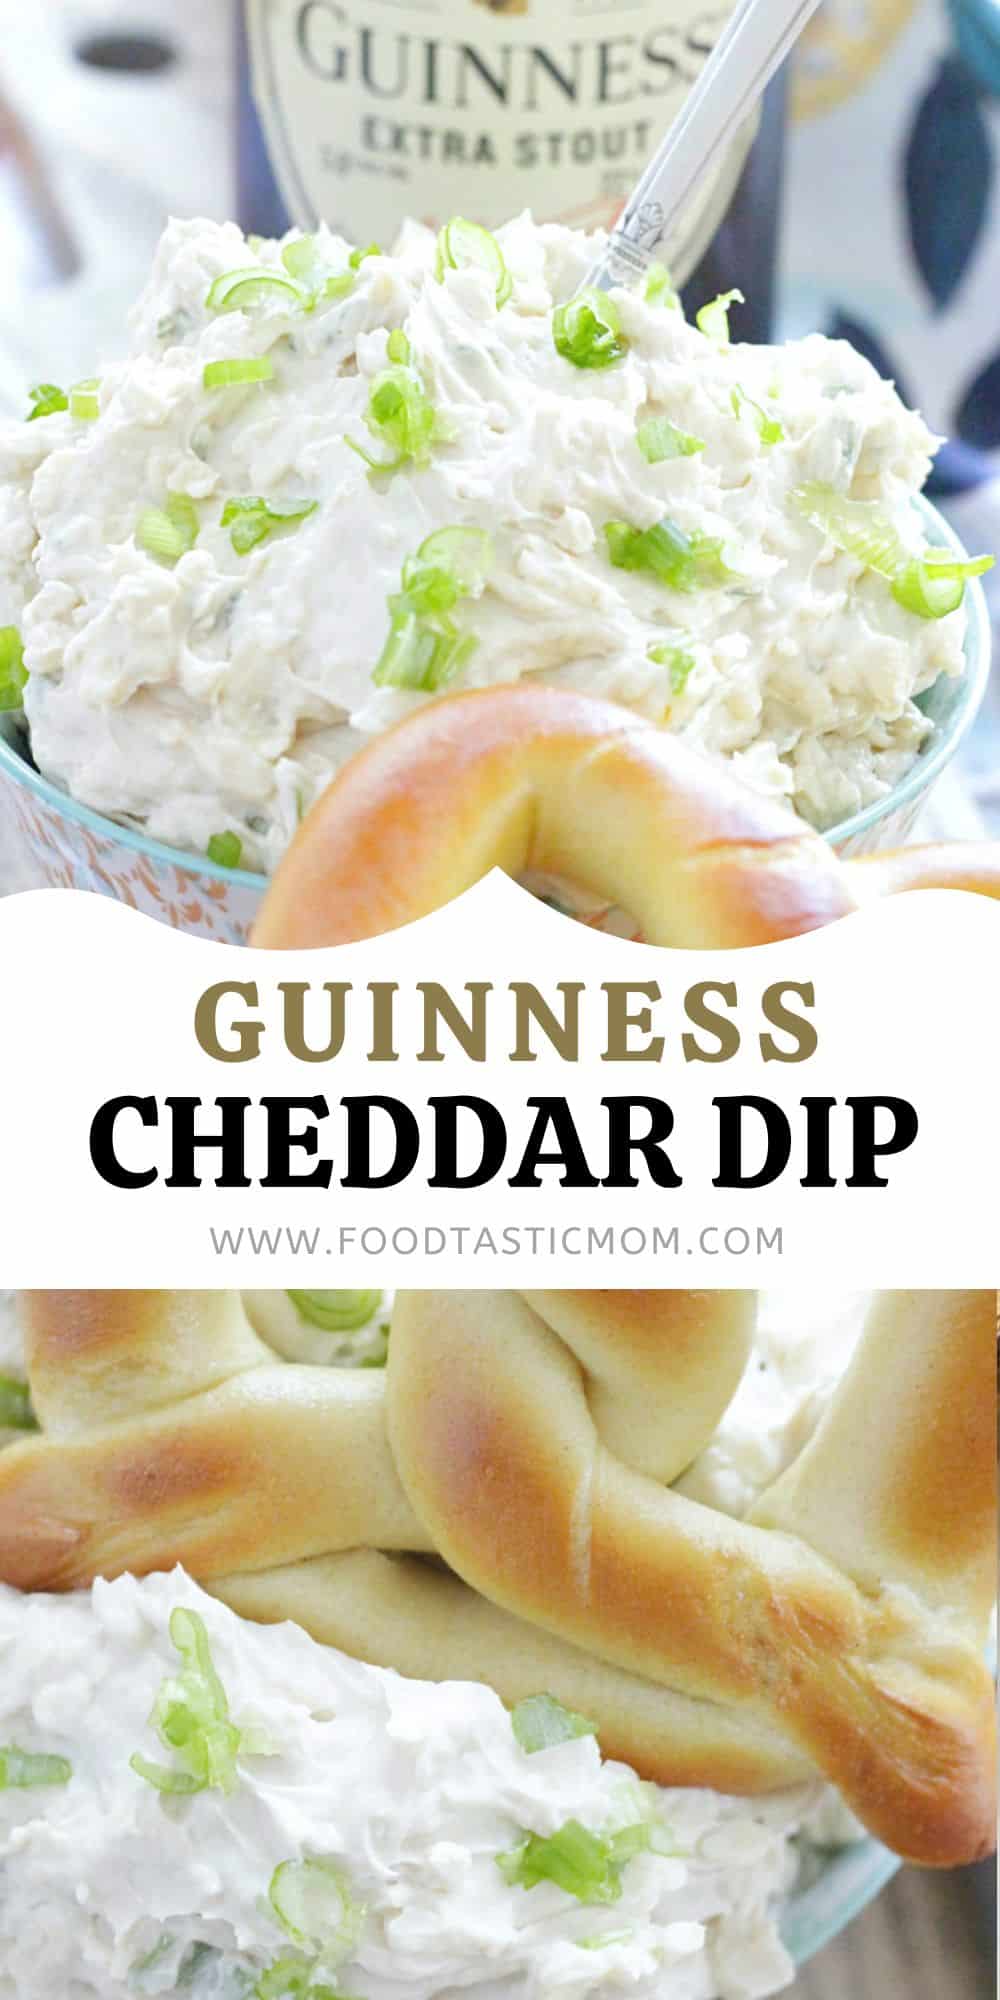 Guinness Cheddar Dip is like an Irish version of beer cheese and is a terrific last-minute appetizer to make for your St. Patrick's Day celebration. via @foodtasticmom